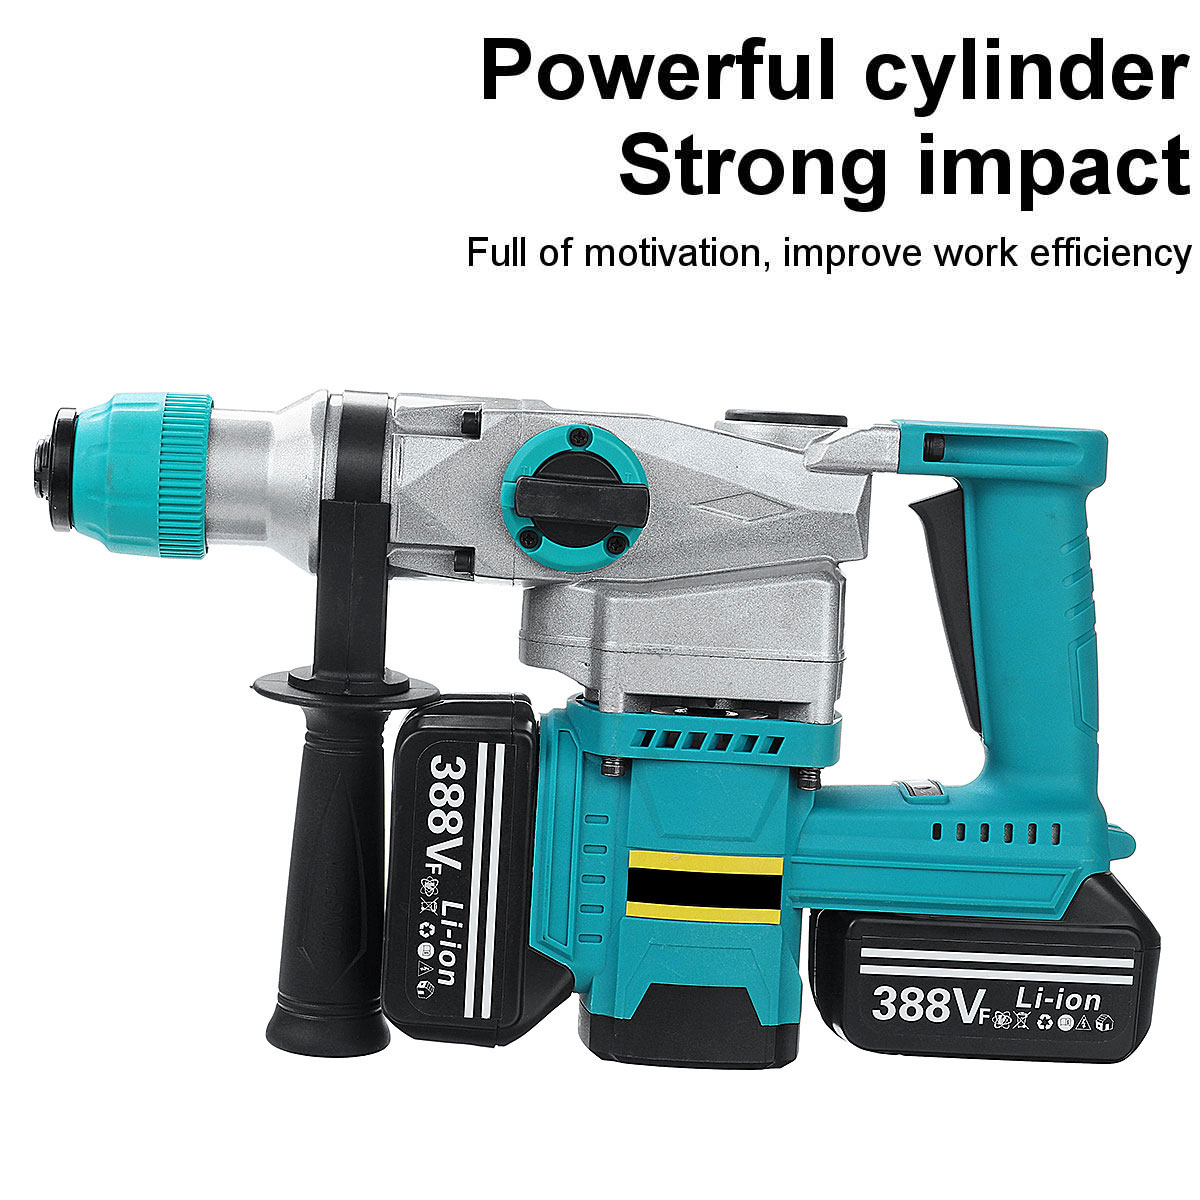 2000W-Brushless-Electric-Hammer-Heavy-Duty-Rechargeable-Impact-Drill-Multifunction-Hammer-W-2pcs-Bat-1879569-4